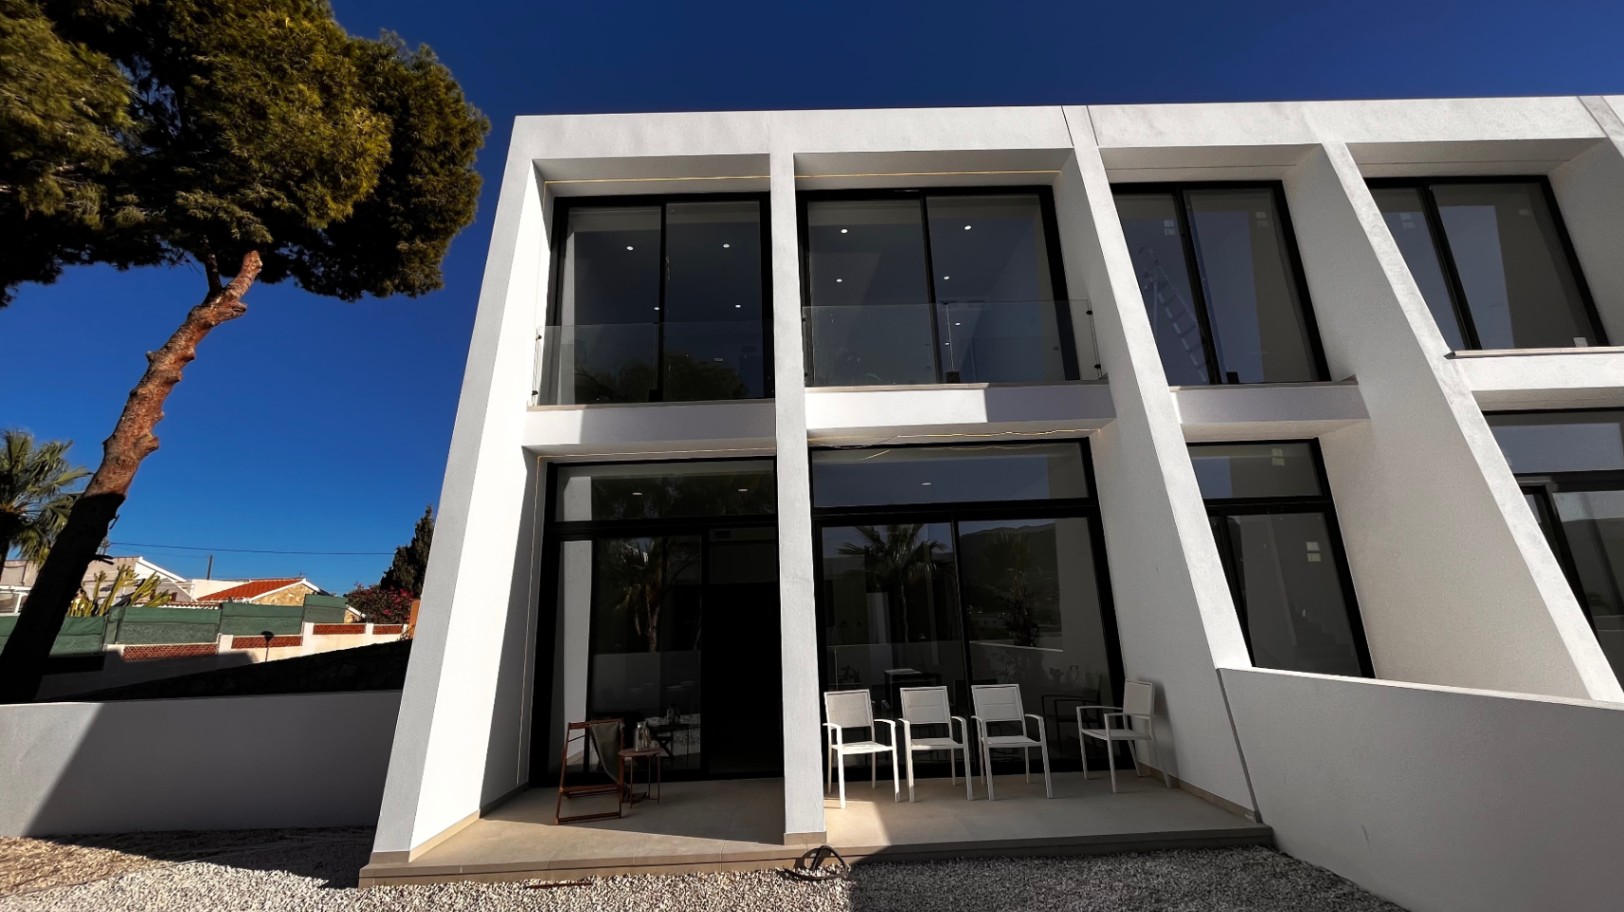 Photogallery - 1 - Exceptional homes in the Costa Blanca. Unparalleled Service. Exceptional properties in the Costa Blanca